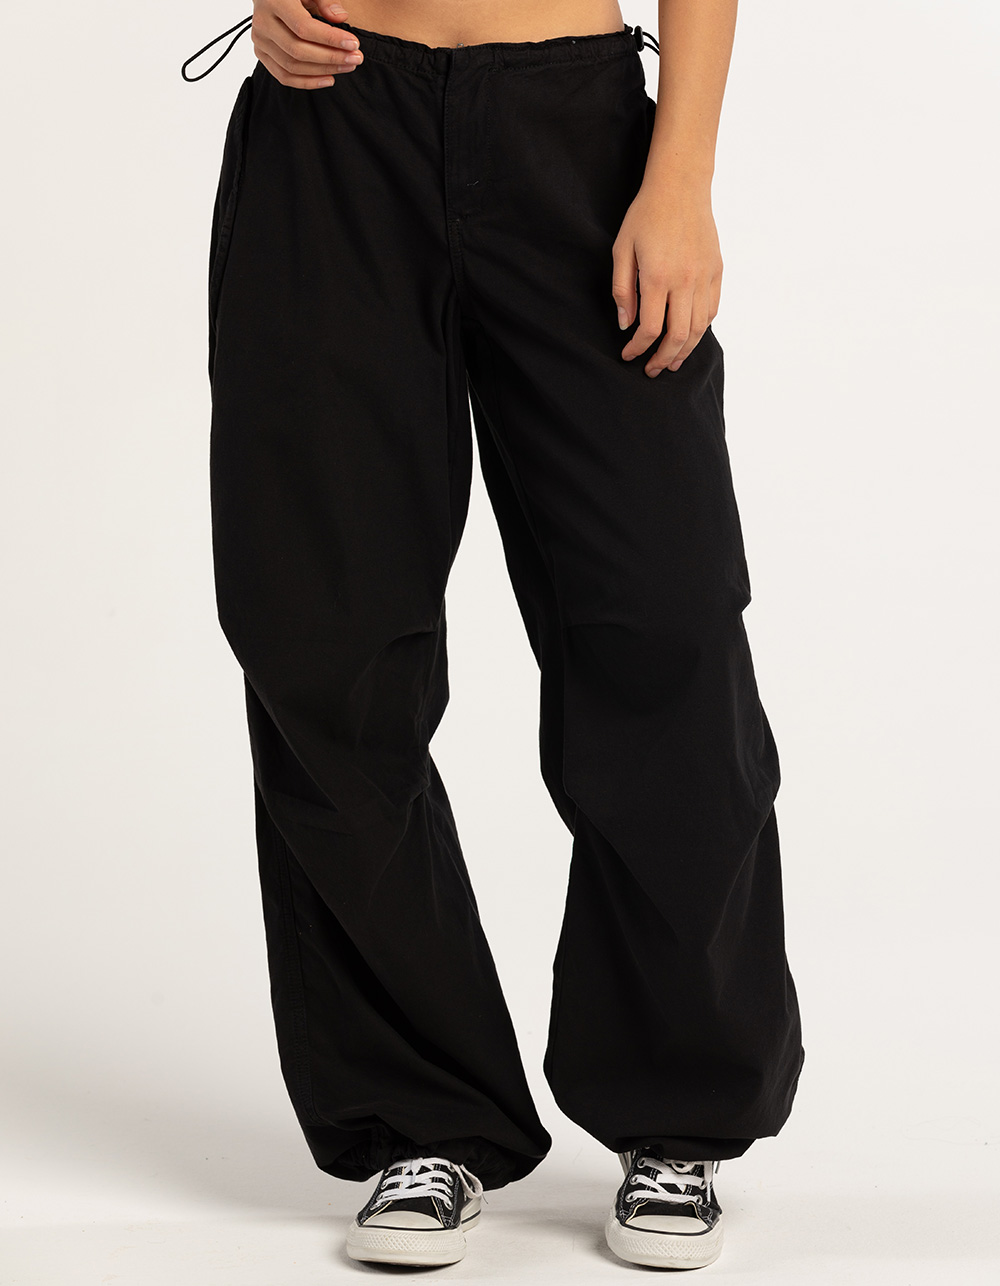 BDG Urban Outfitters Baggy Cargo Womens Pants - BLACK | Tillys